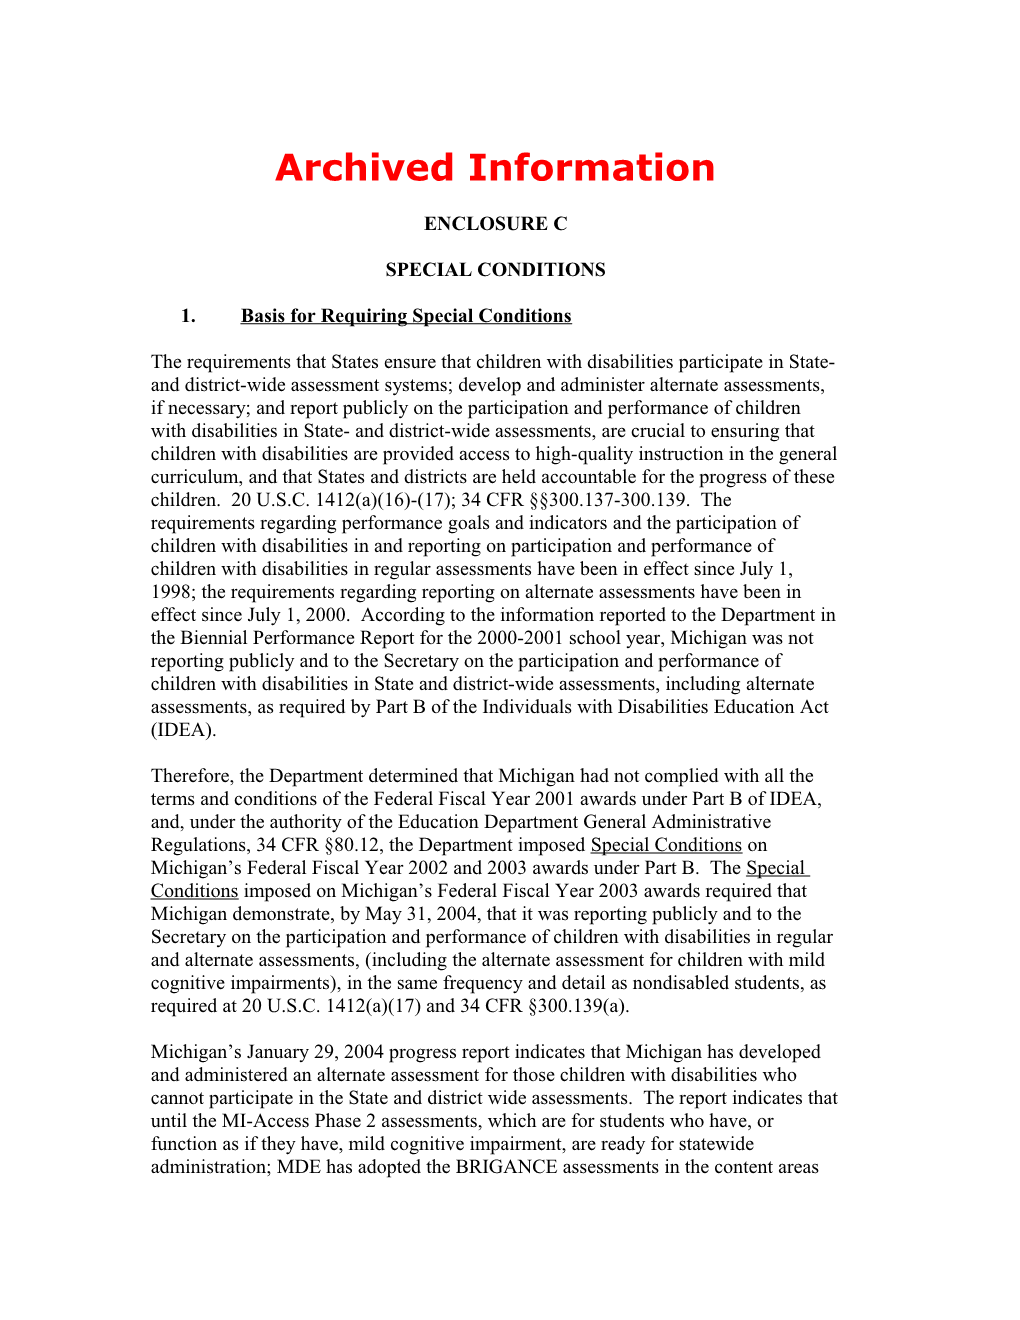 Archived Information: 2004 Michigan Individuals with Disabilities Education Act (IDEA)